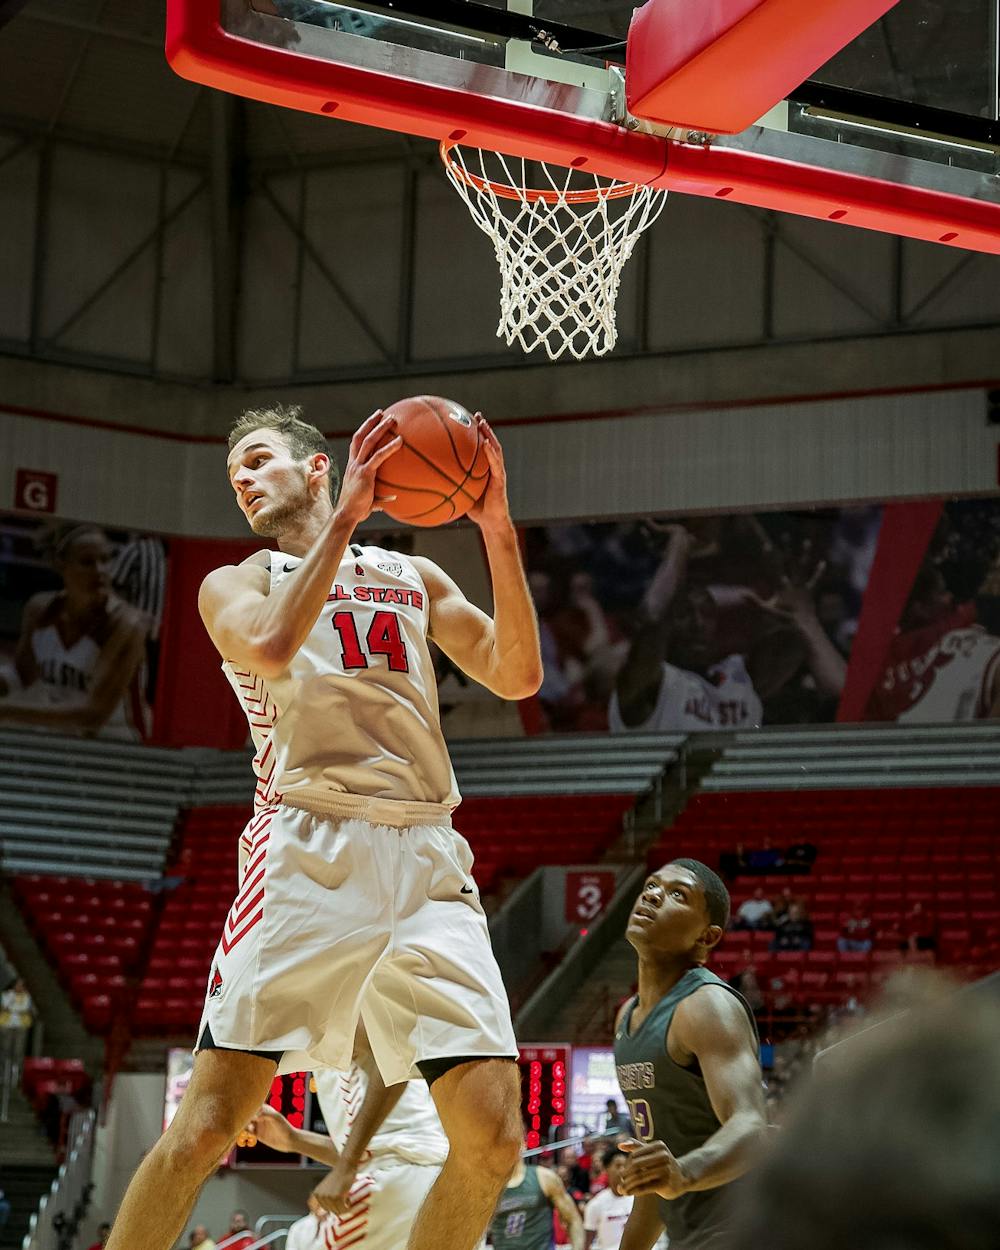 <p>Senior forward, Kyle Mallers (14), grabs a rebound during the second half against the defense on Nov. 5, 2019, at John E. Worthen Arena. Mallers ended the game with seven total rebounds for the Cardinals win 87-43. <strong>Omari Smith, DN</strong></p>